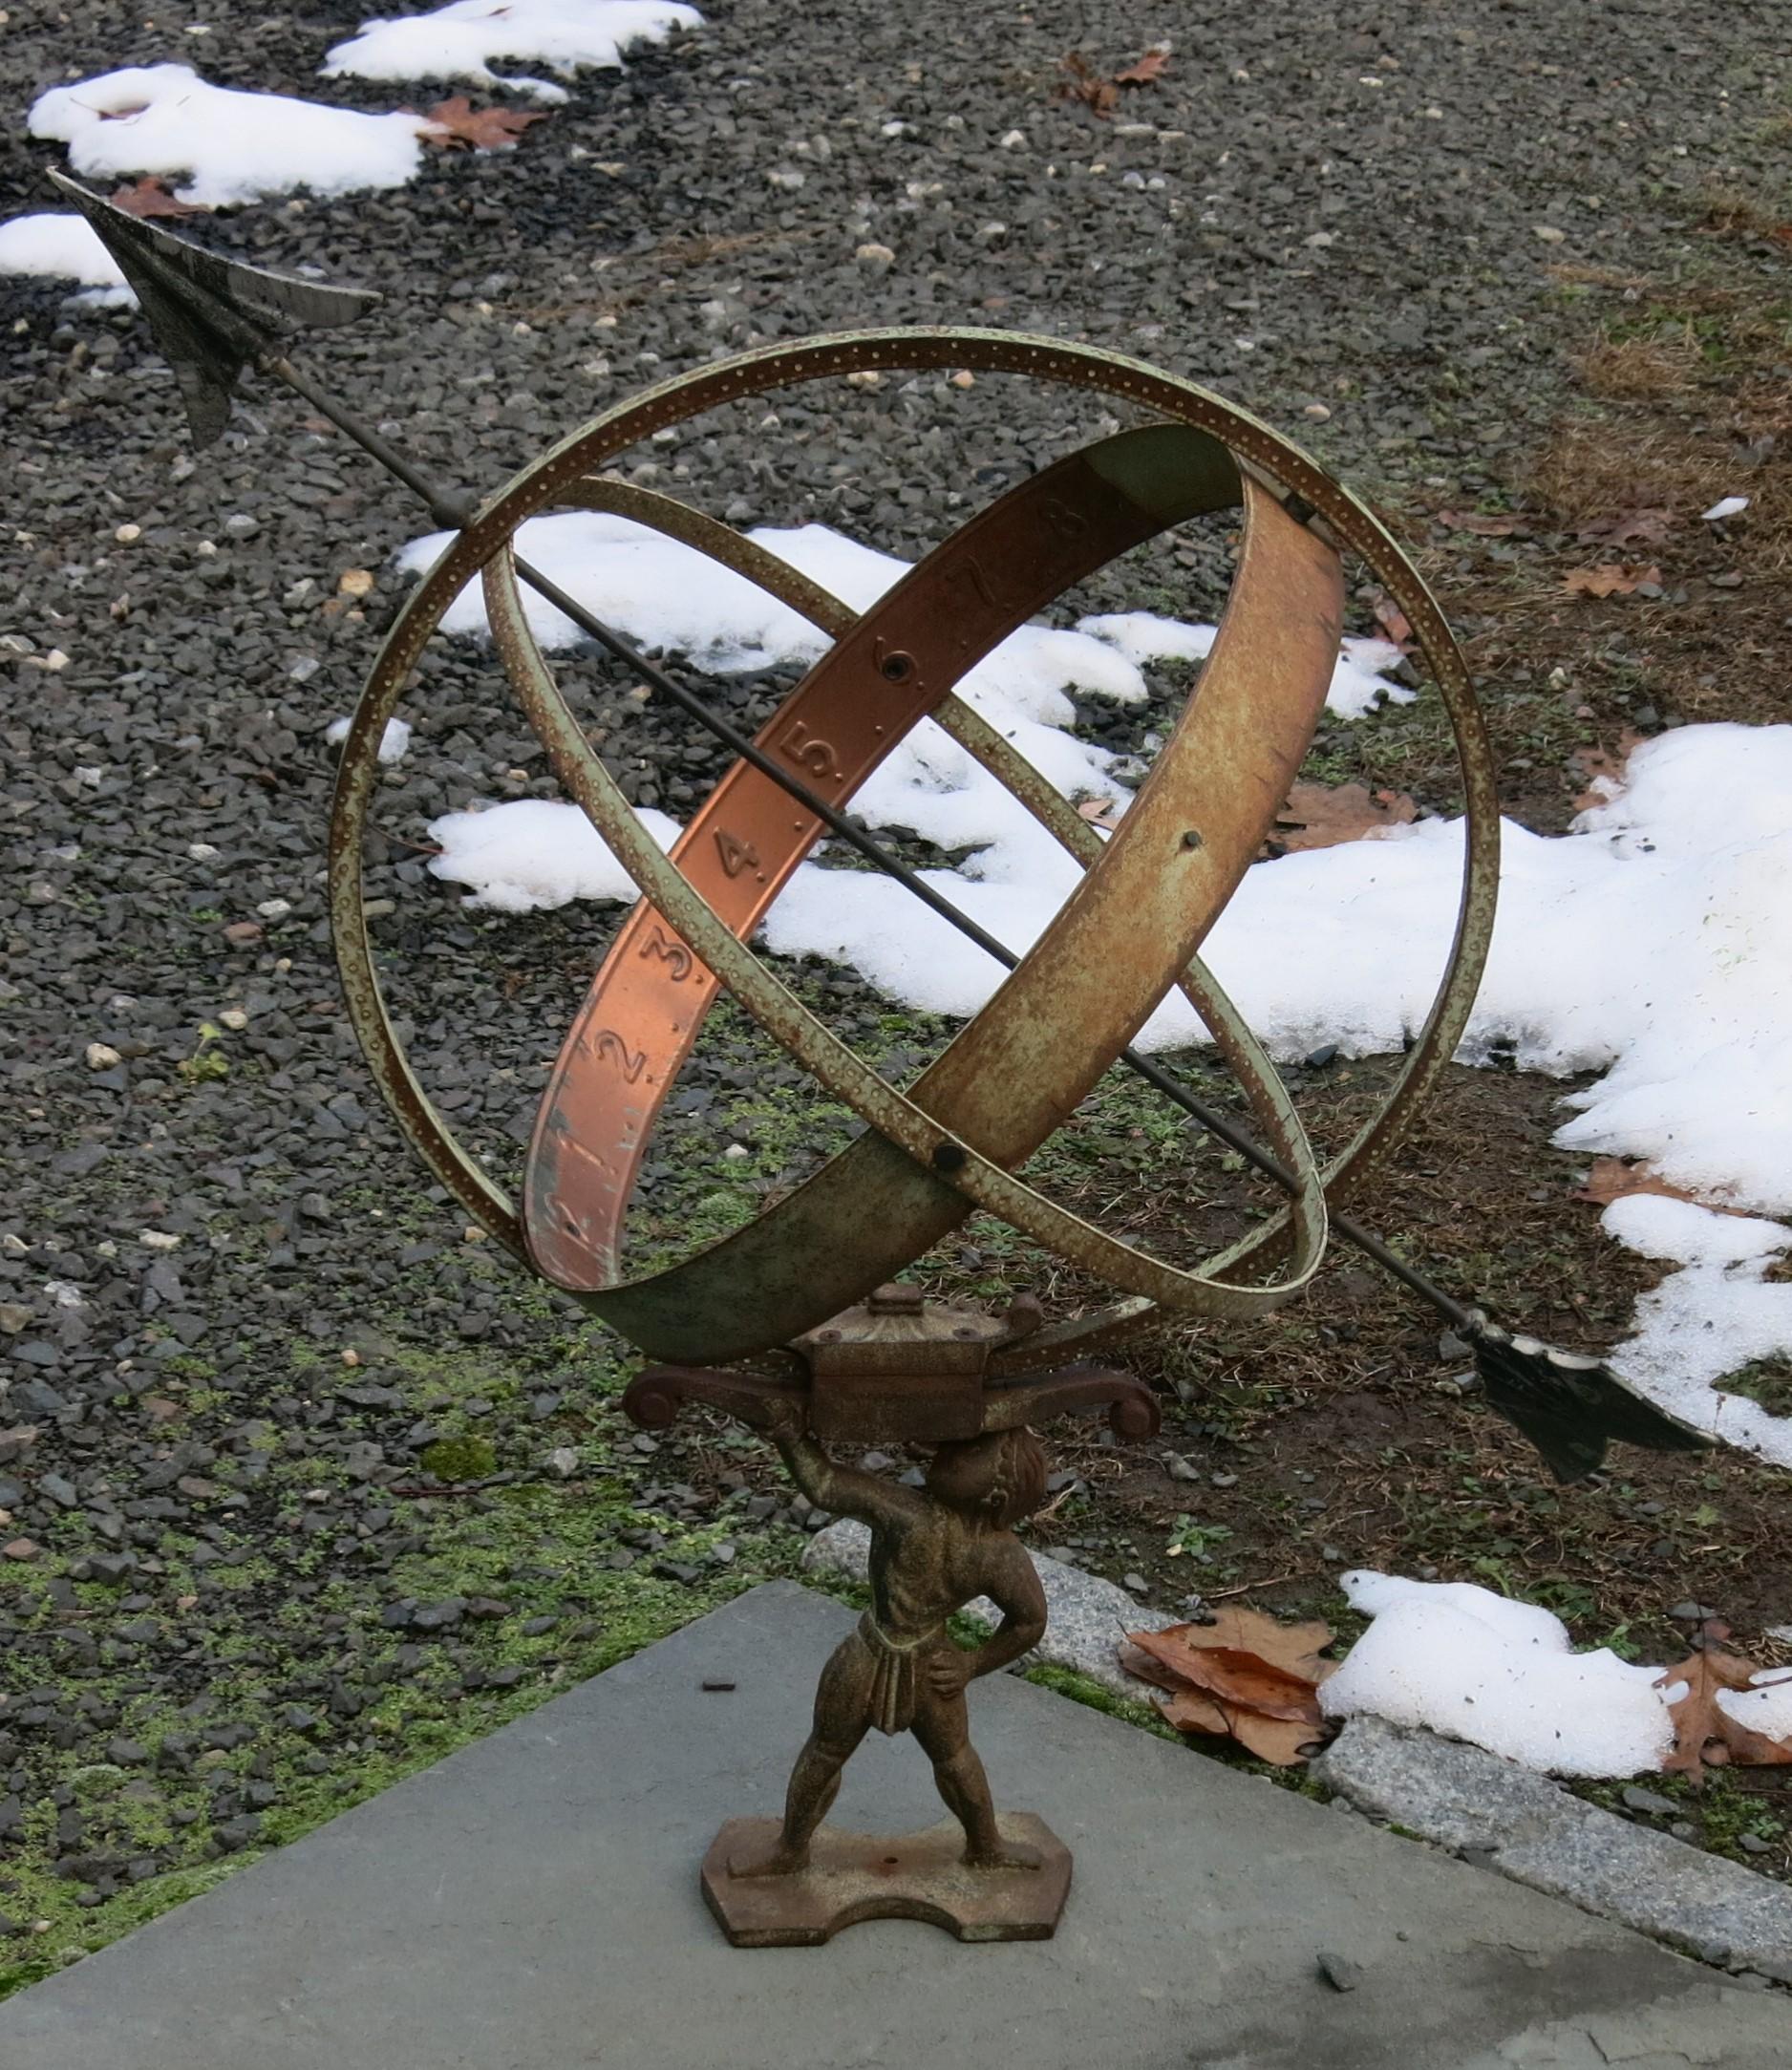 Vintage Swedish Armillary attributed to Sune Rooth. It is 33